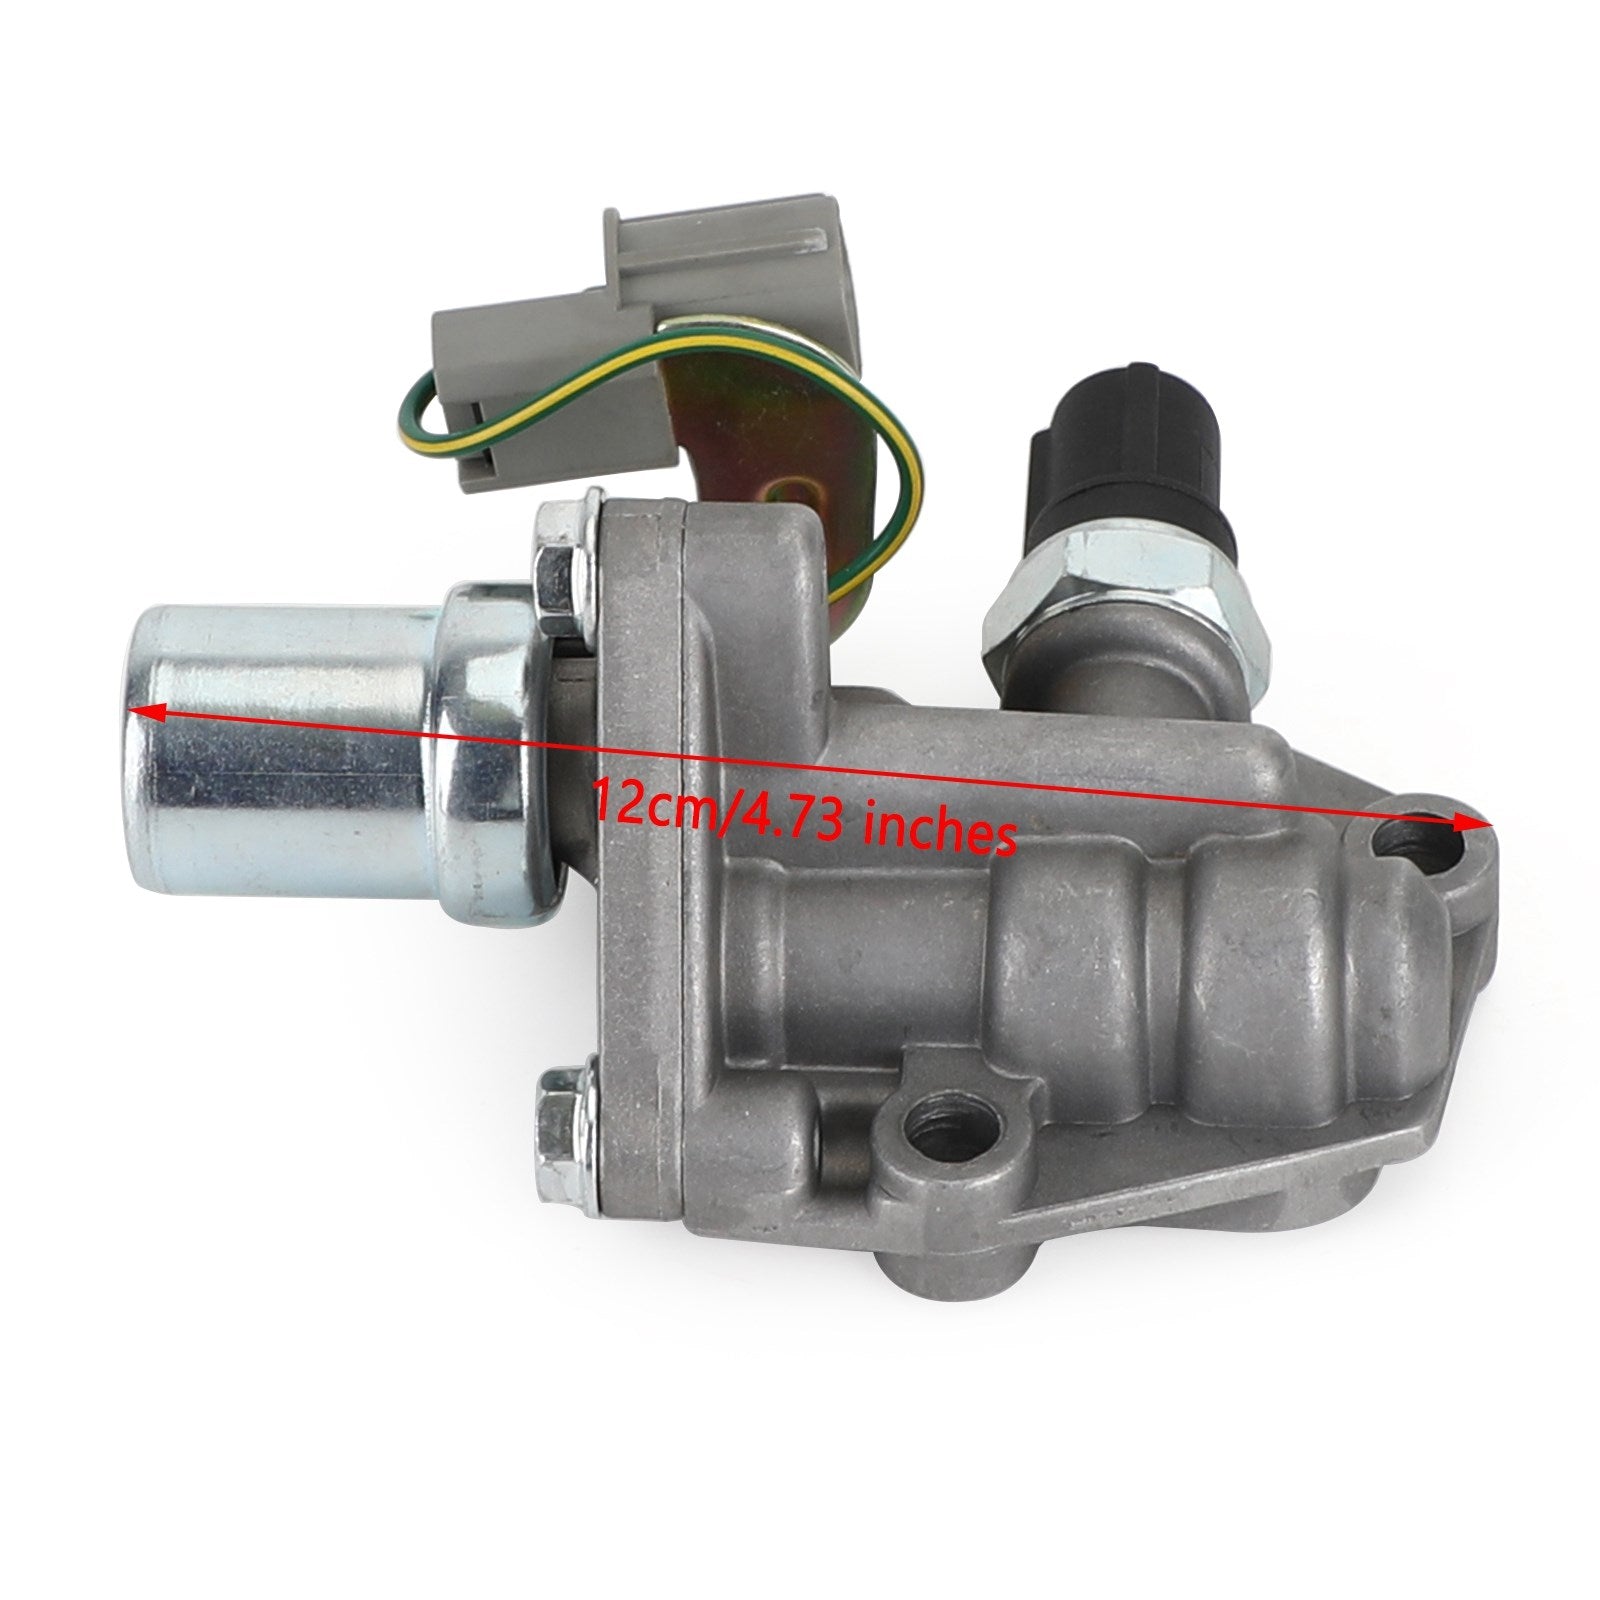 VTEC Solenoid Spool Valve 15810-PAA-A02 For Honda Accord 4 Cyl Odyssey 1998-2002 Generic